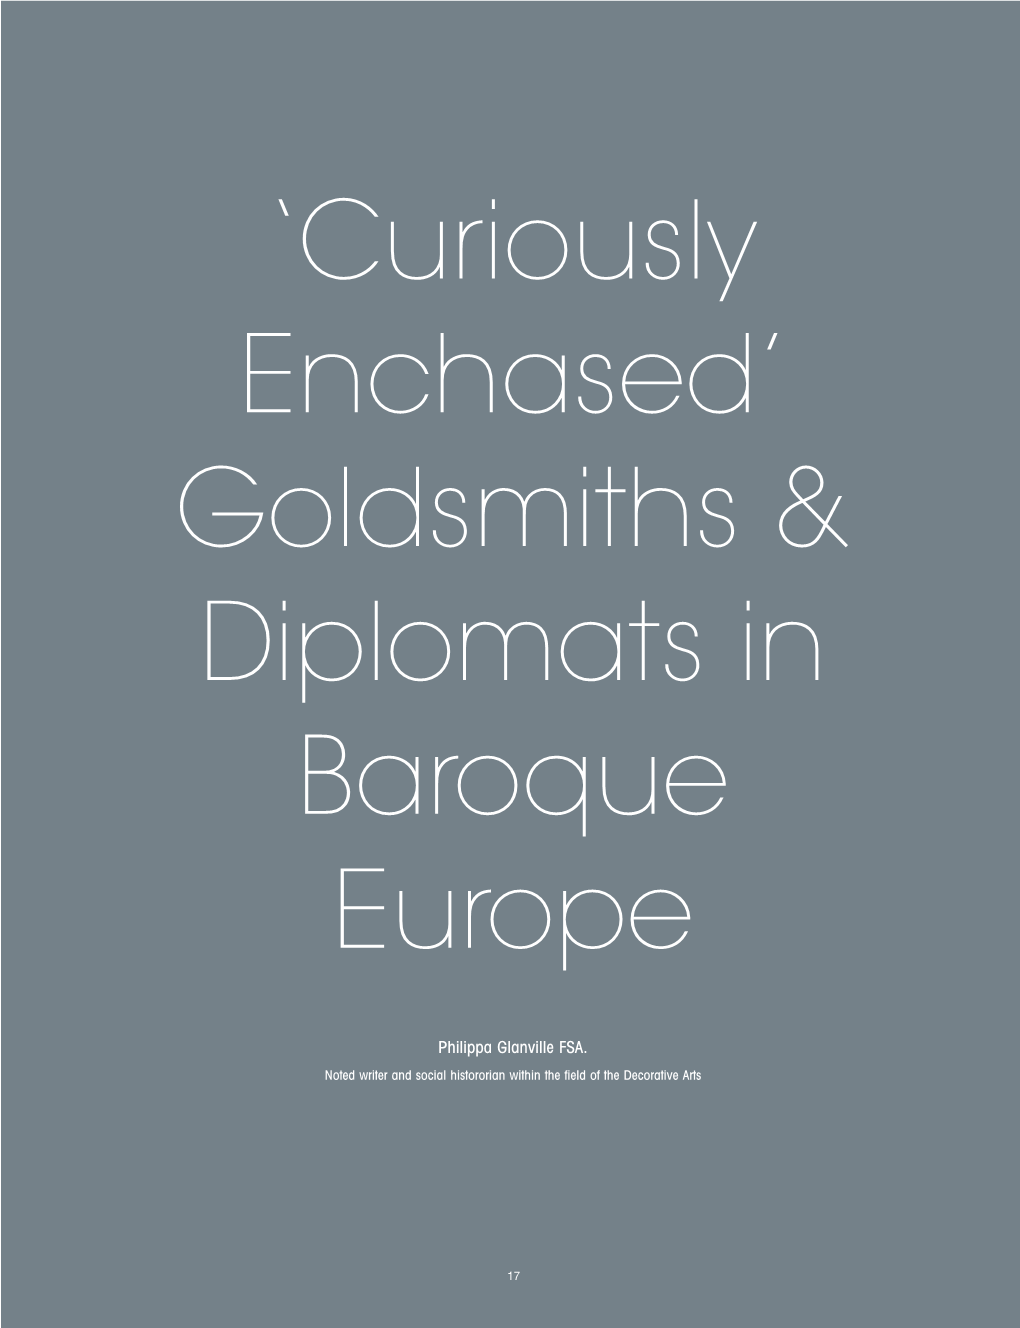 'Curiously Enchased' Goldsmiths & Diplomats in Baroque Europe